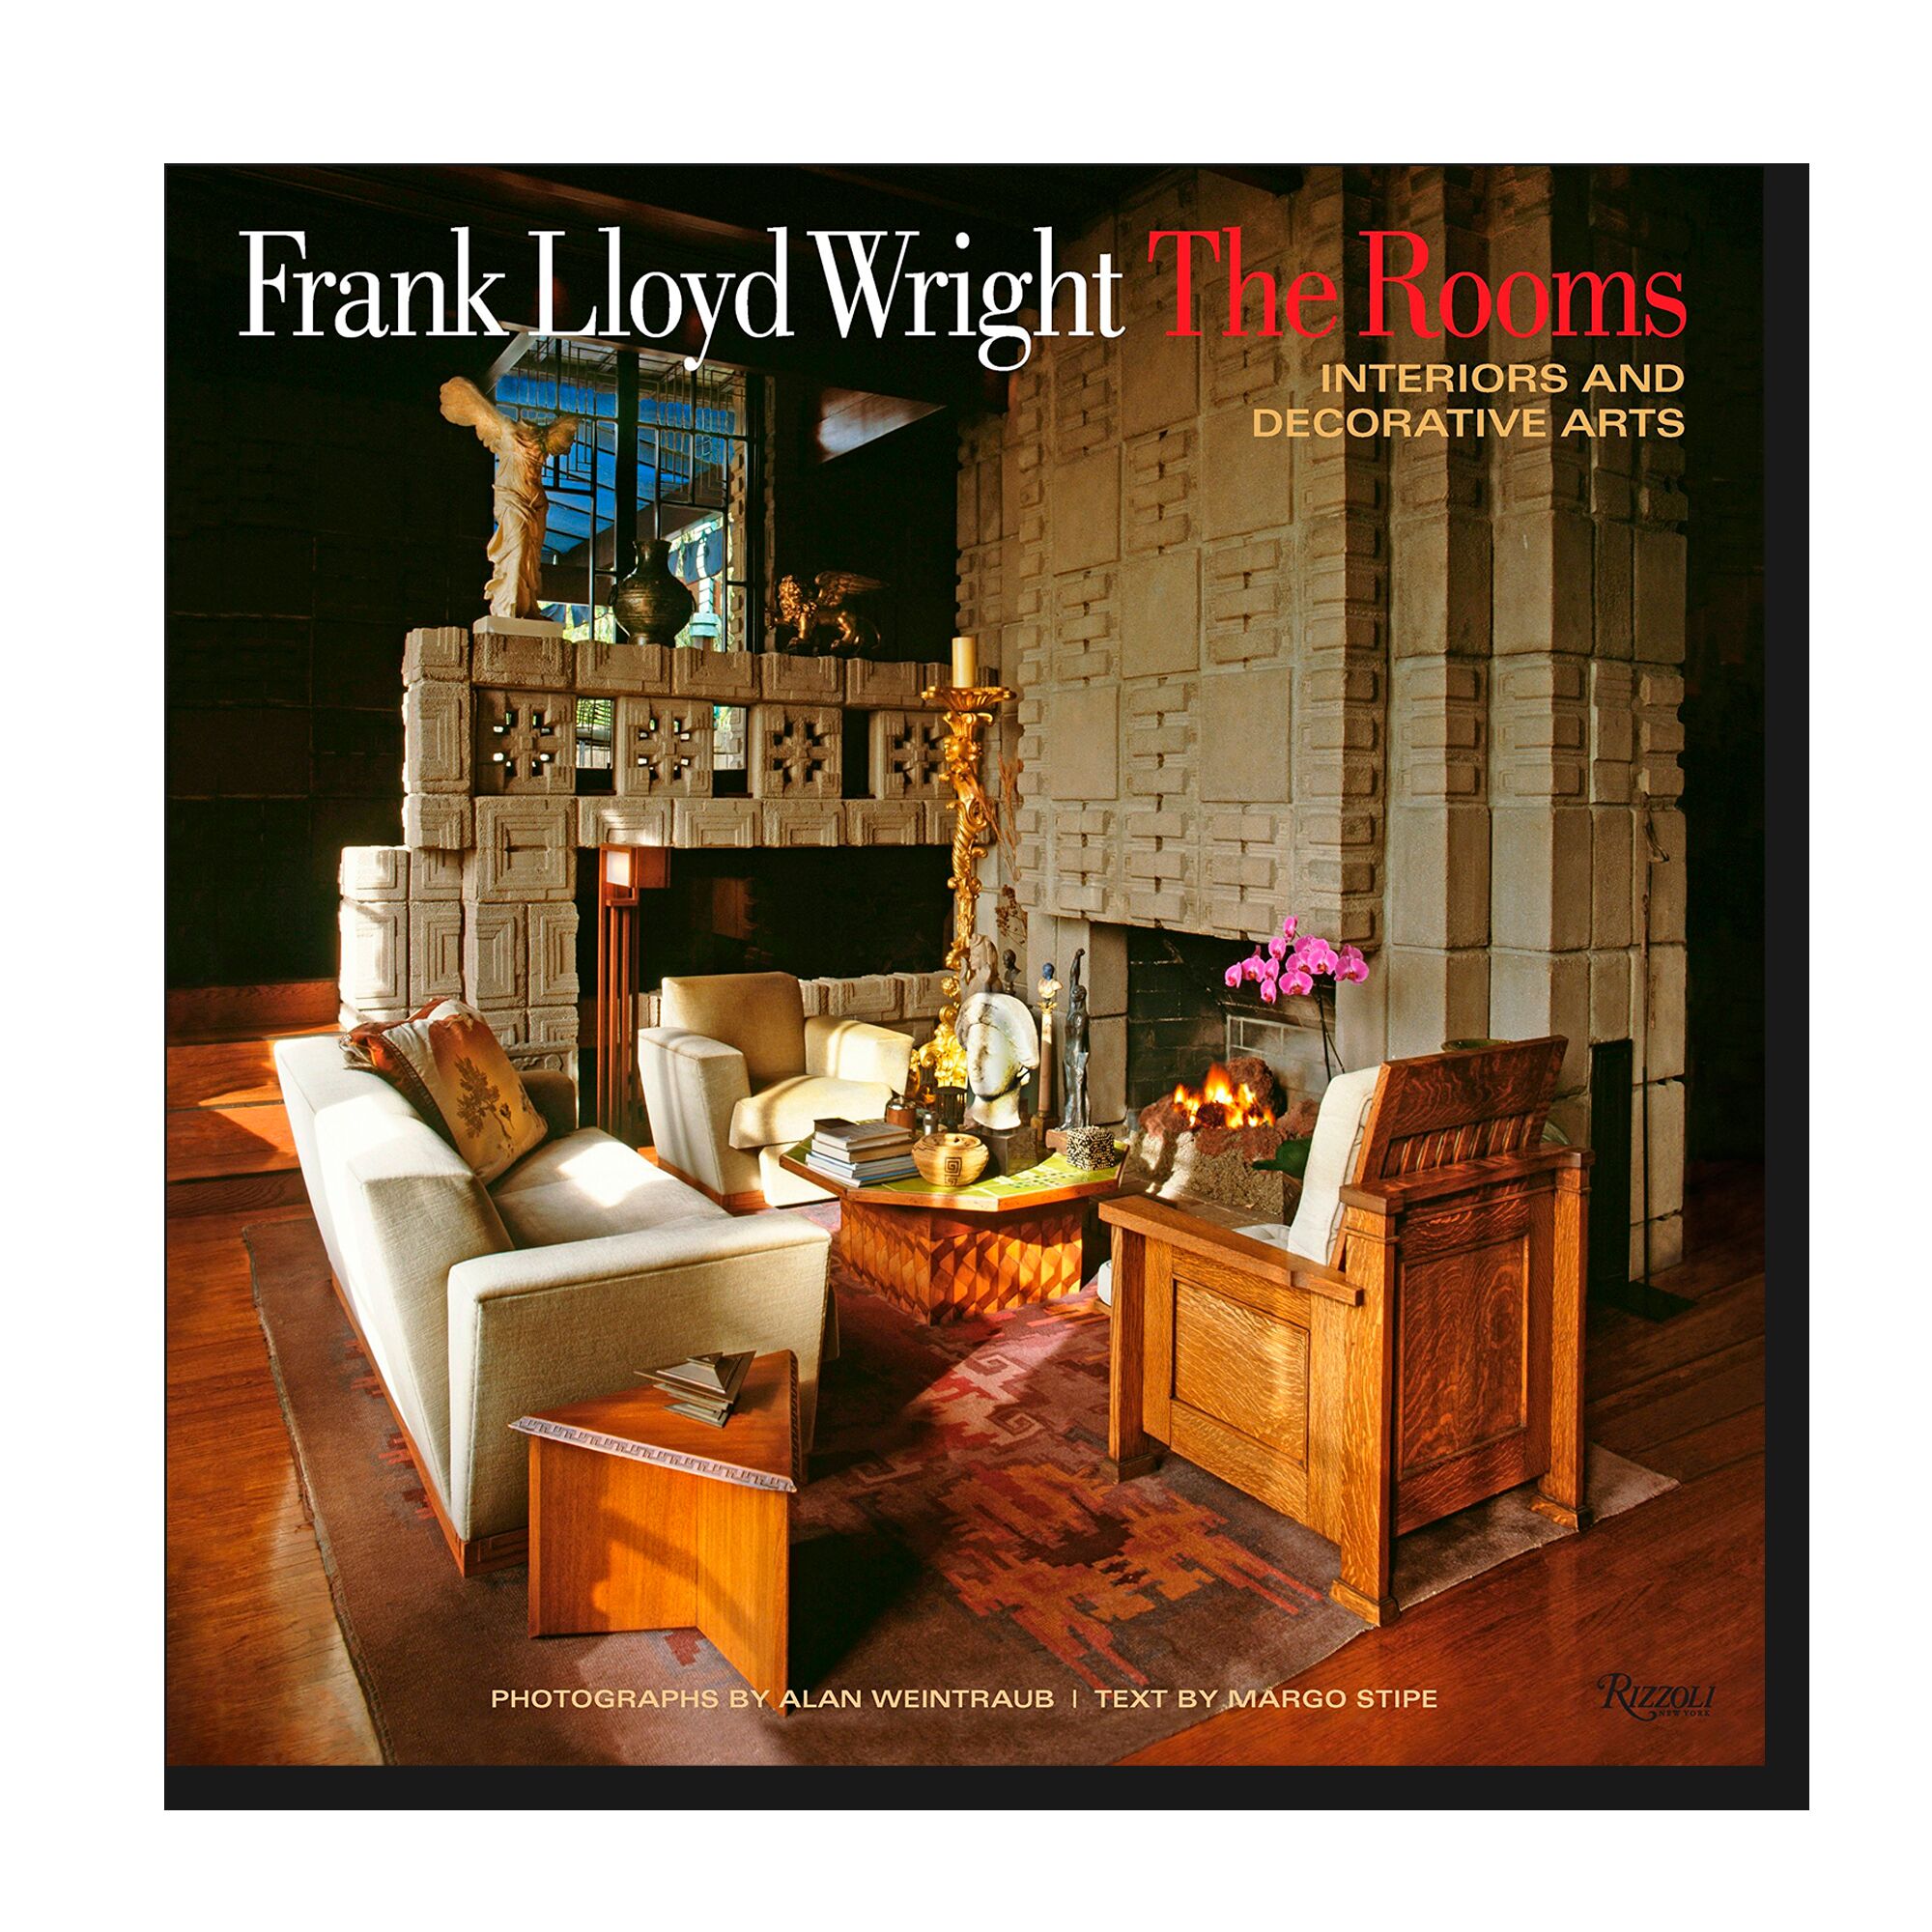 Frank Lloyd Wright: The Rooms